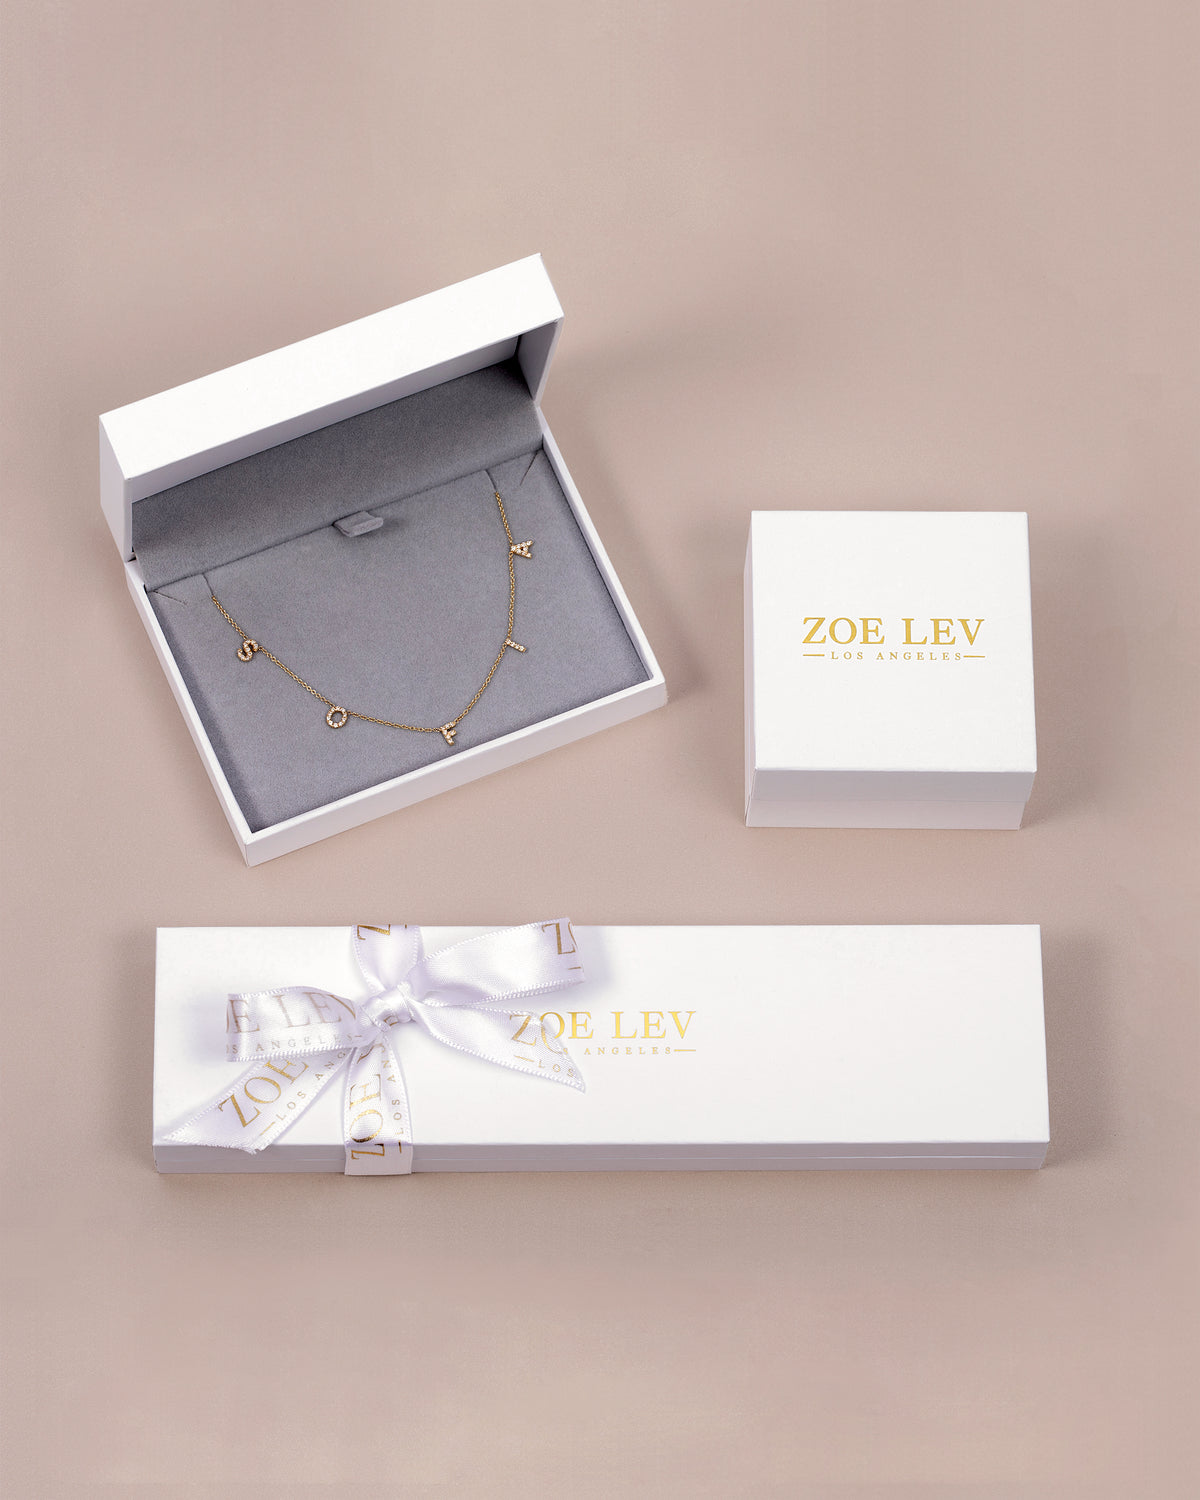 14k Gold Large Paper Clip Chain with Diamond Toggle Necklace